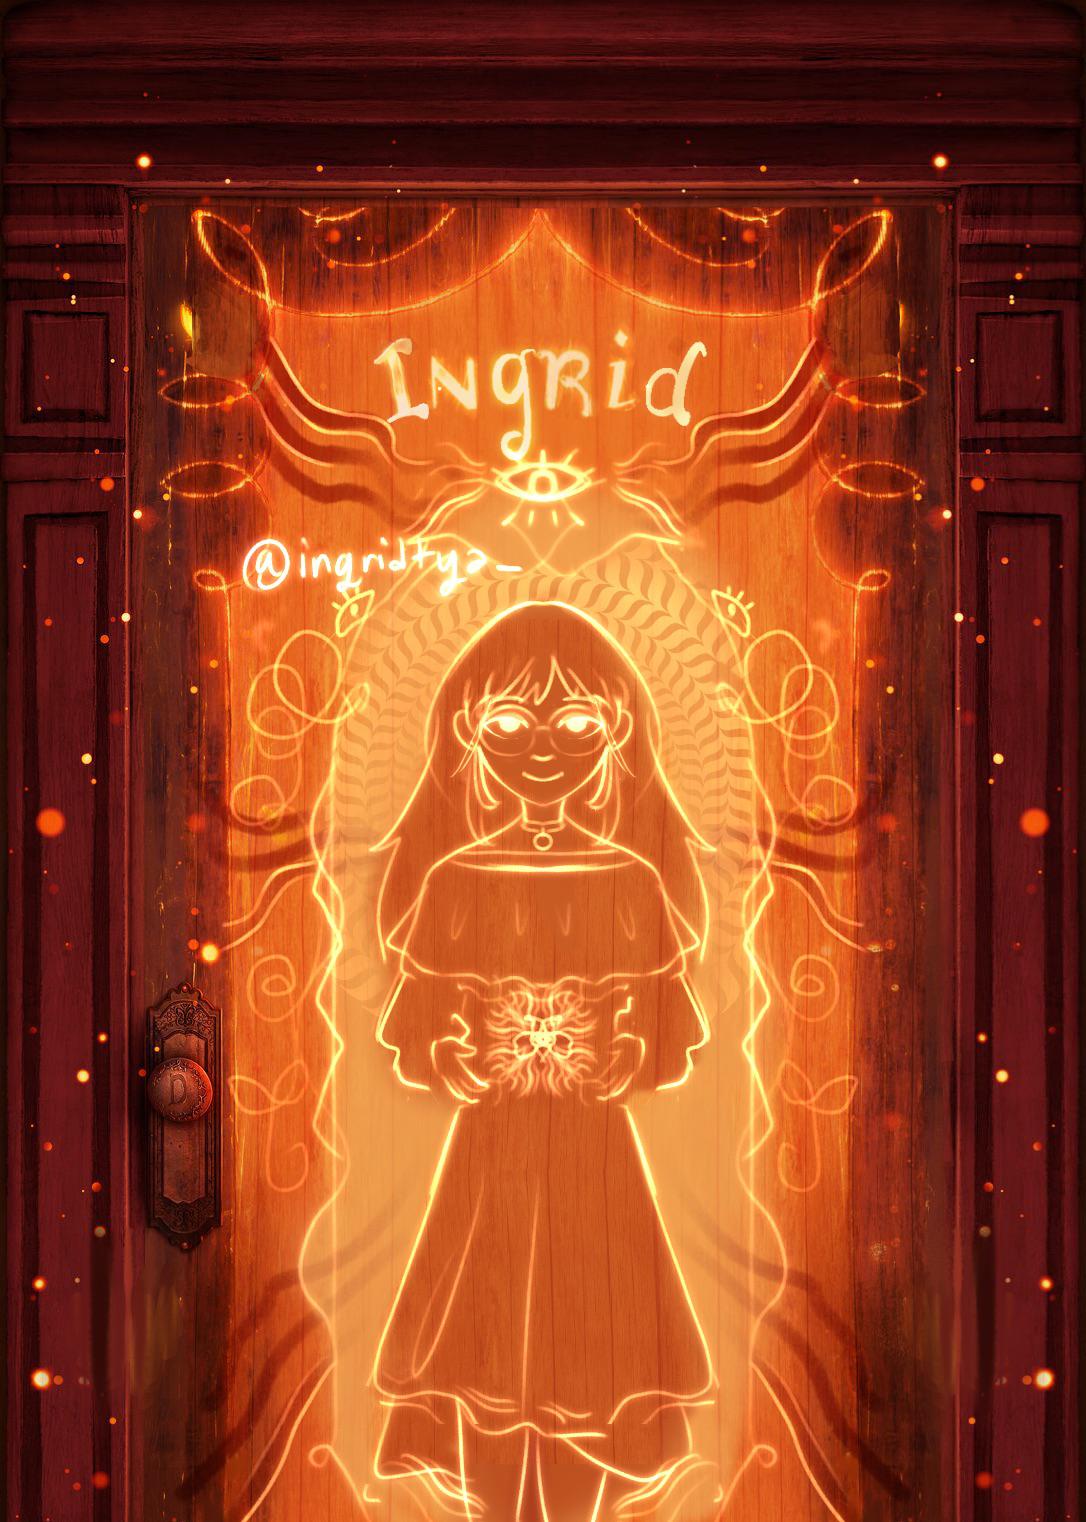 tried making my version of encanto door! my gift here is illusion manipulation :D